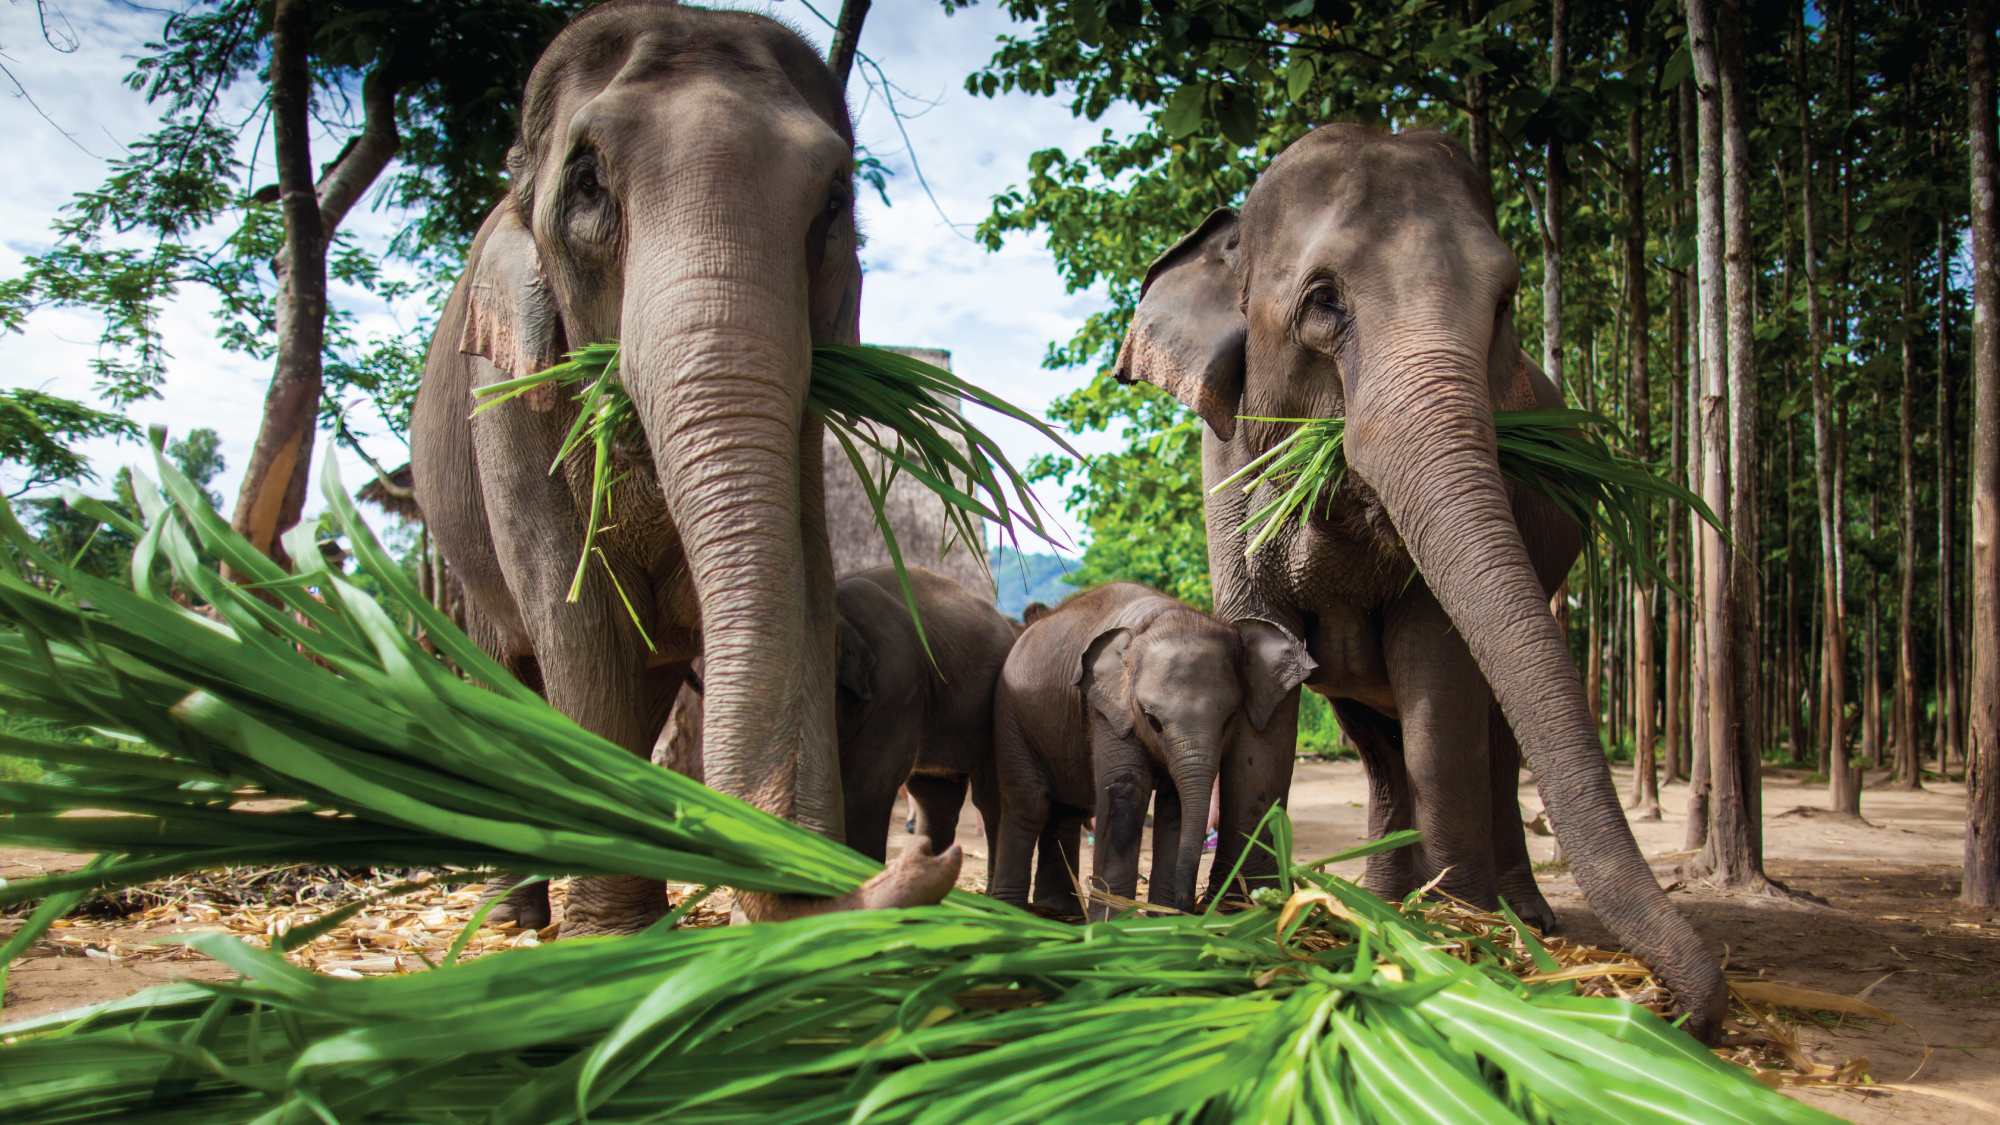 Elephants in a natural sanctuary setting.